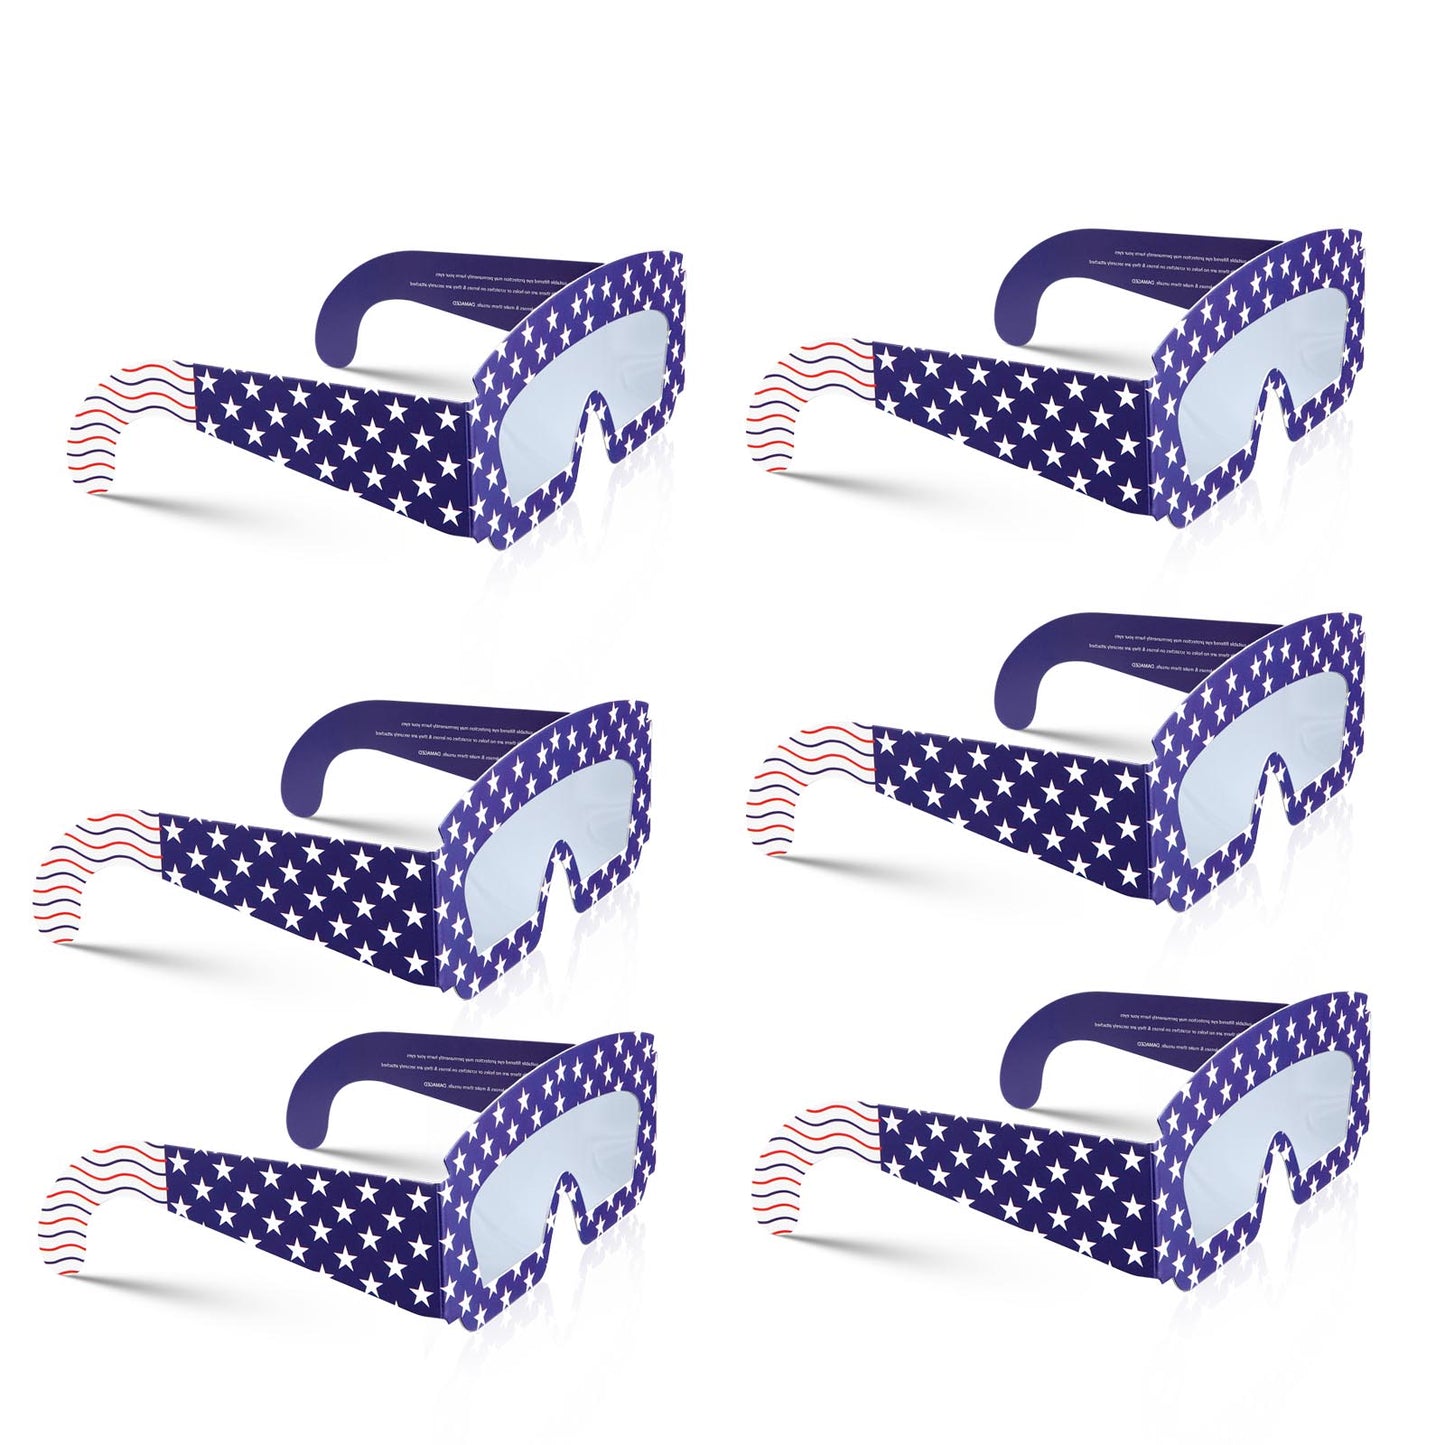 6 Packs Paper Solar Eclipse Glasses -CE and ISO Certified Safe Shades for Direct Sun Viewing - NASA-APPROVED(American Flag))